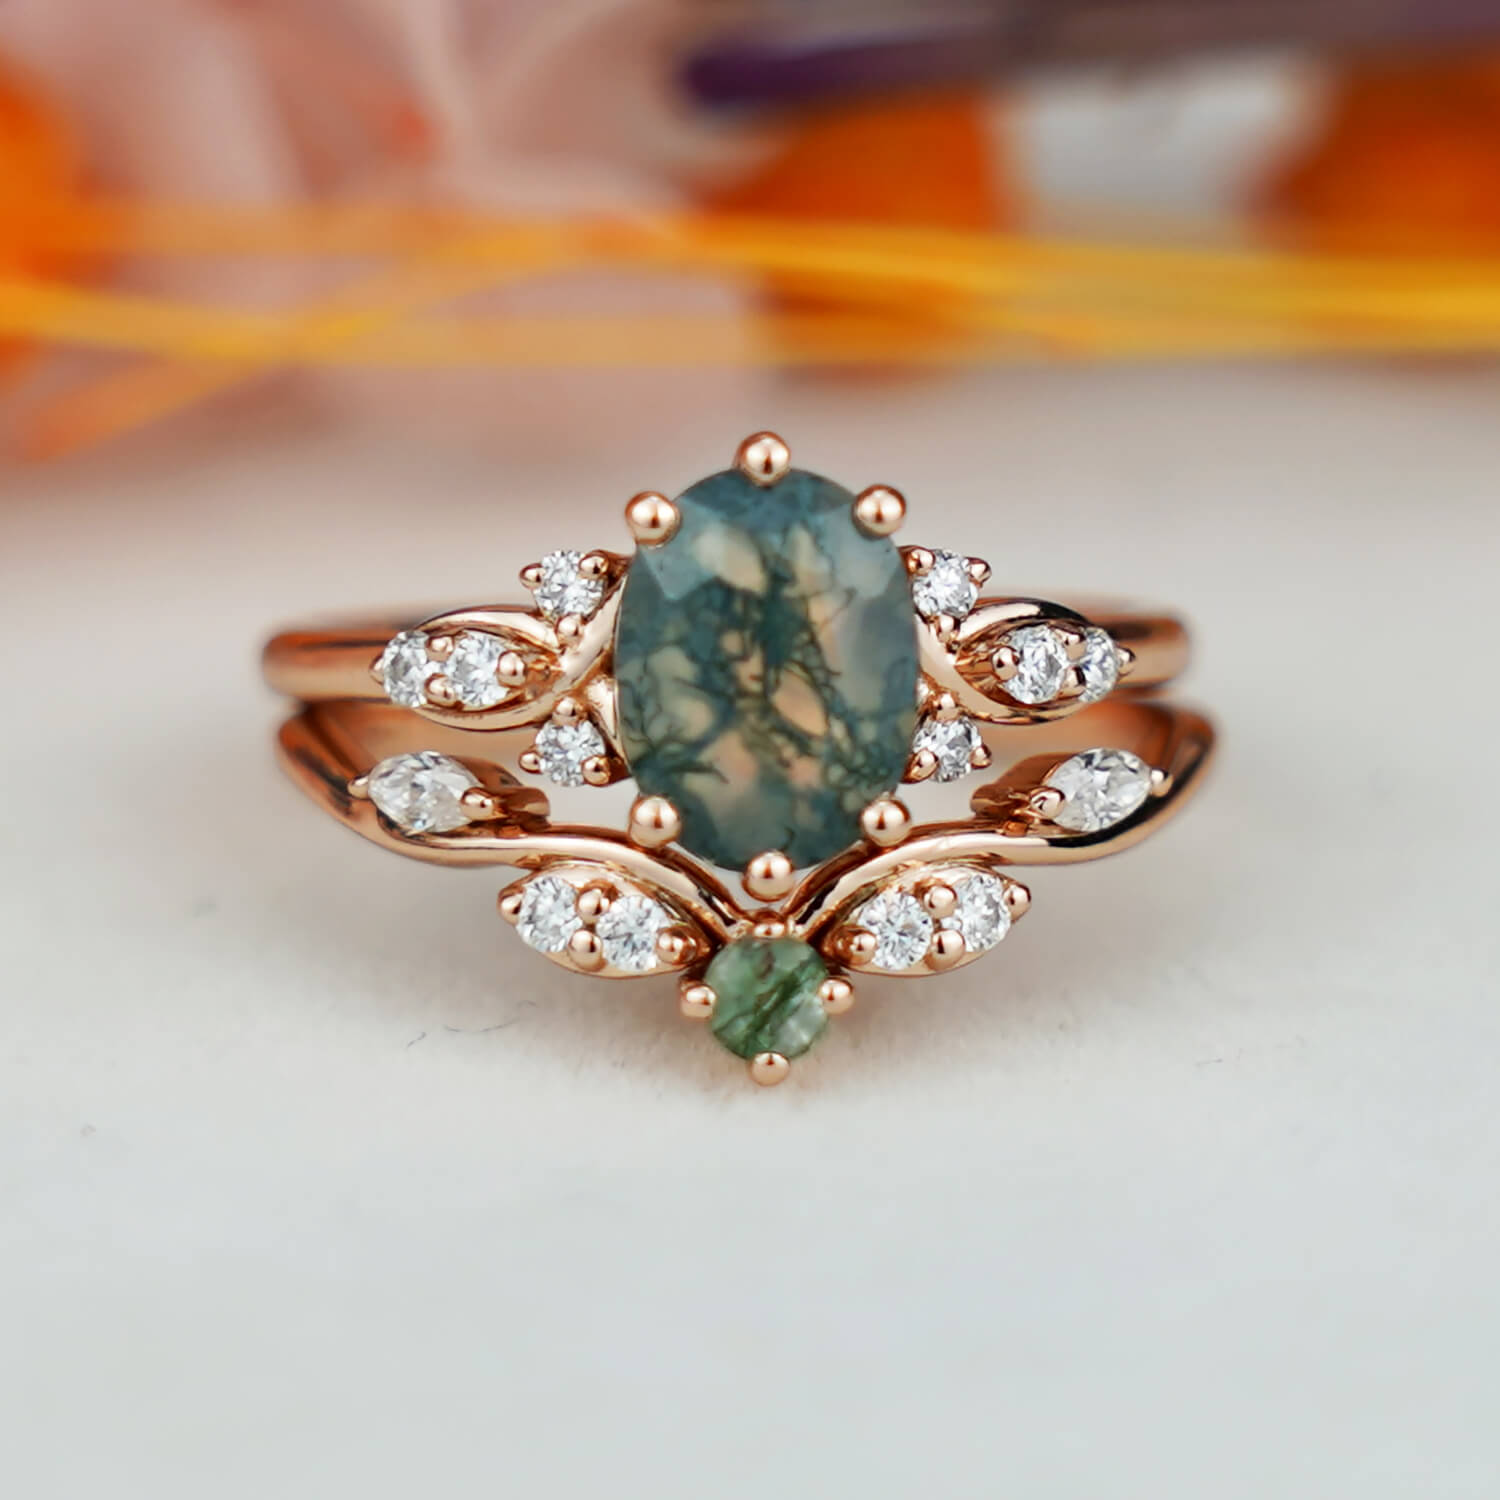 Vintage Oval Moss Agate Engagement Ring Set Bridal Sets Women Gold Unique Green Gemstone Promise Ring Cluster Ring Anniversary Ring Gift